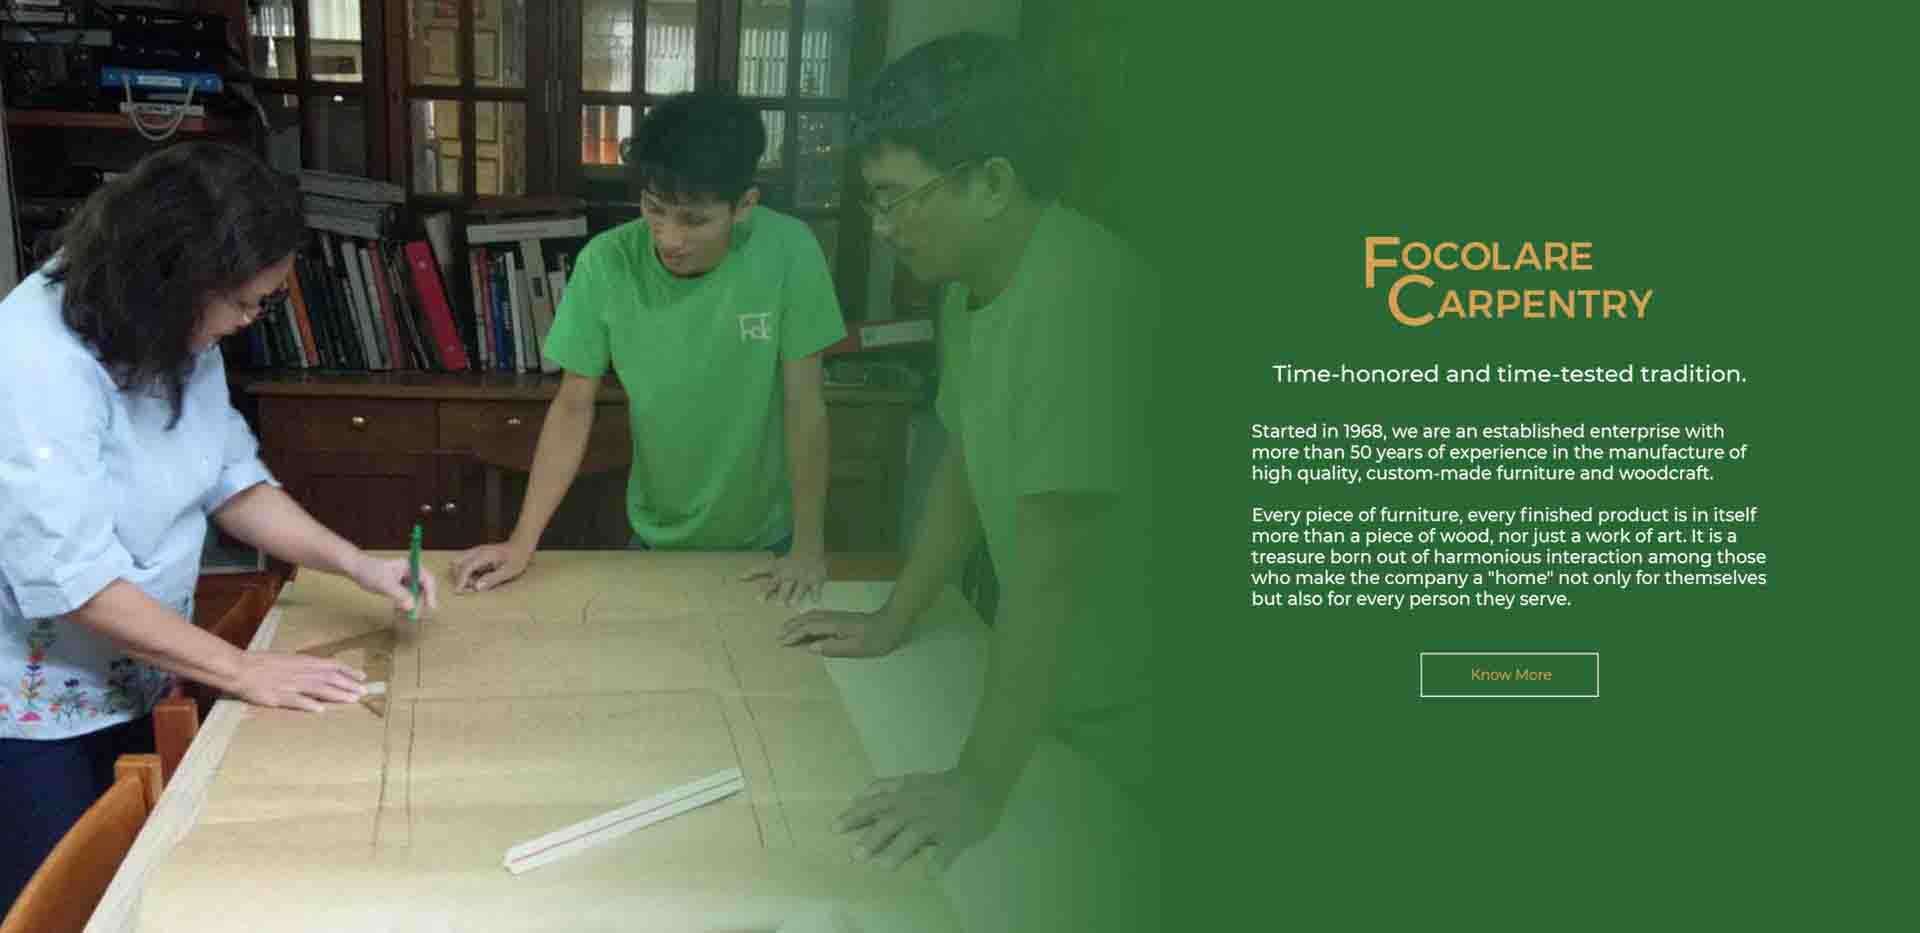 Focolare Carpentry - High Quality, Custom-made Furniture - Manila, Philippines. Custom-made Chairs, Tables, Beds, Sofa, Cabinets, Handicraft, Woodworks.